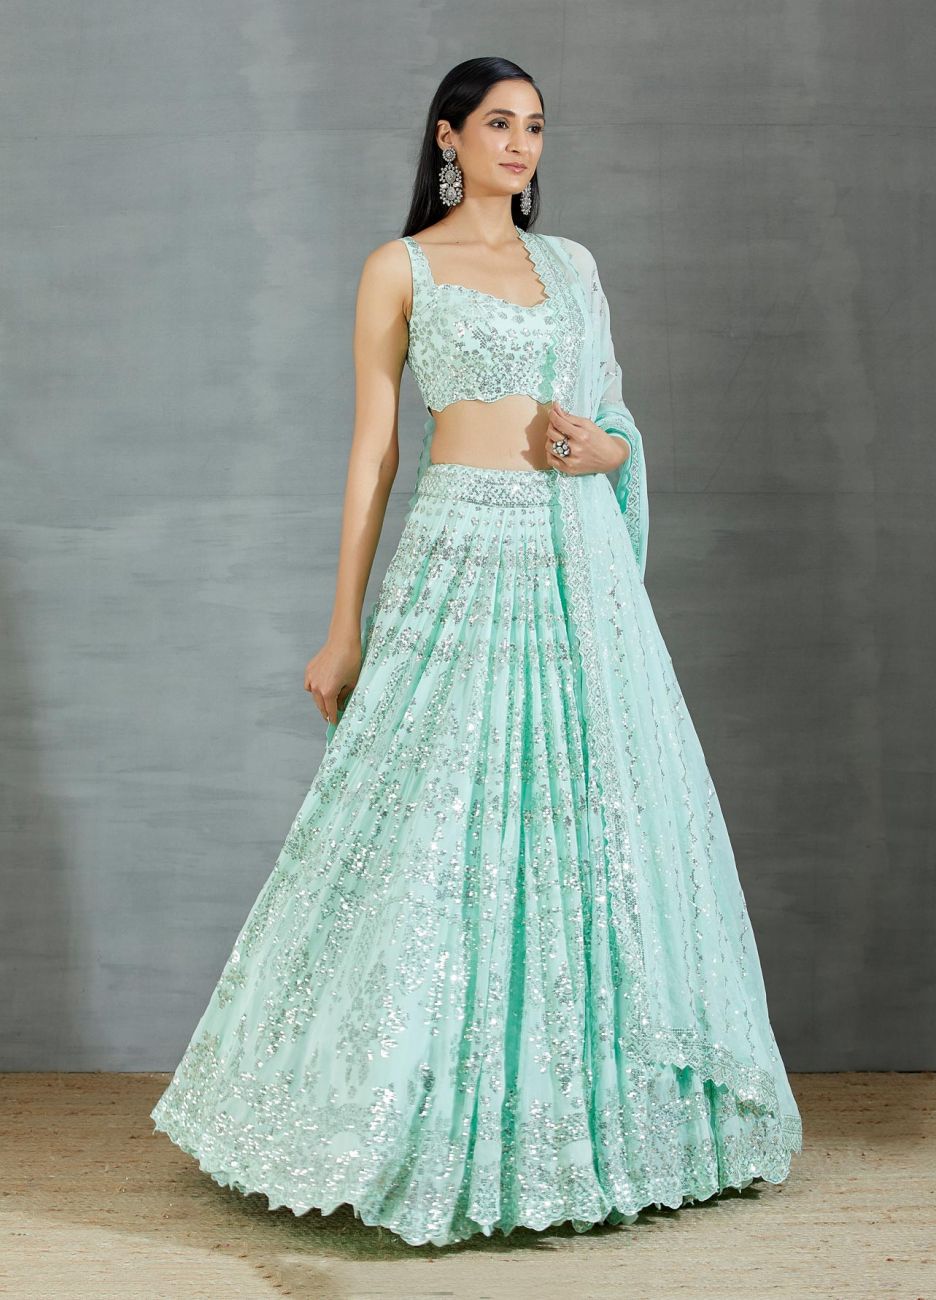 Sea Green Lehenga Set - Indian Clothing in Denver, CO, Aurora, CO, Boulder, CO, Fort Collins, CO, Colorado Springs, CO, Parker, CO, Highlands Ranch, CO, Cherry Creek, CO, Centennial, CO, and Longmont, CO. Nationwide shipping USA - India Fashion X